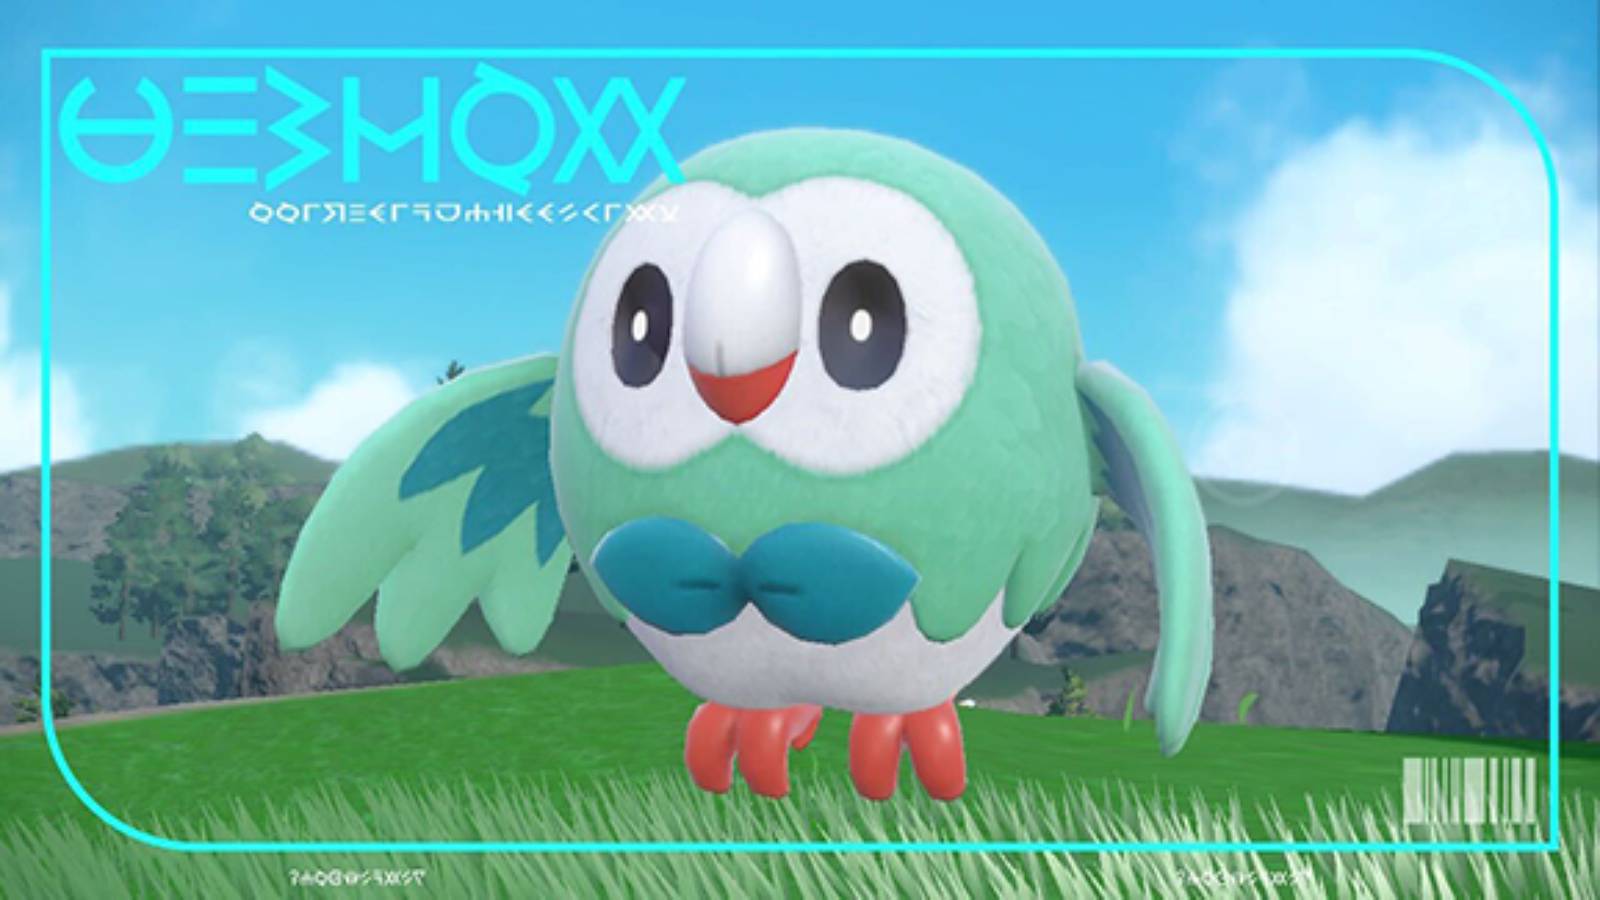 A screenshot from Pokemon Scarlet & Violet shows a Shiny version of Rowlet, the owl Pokemon